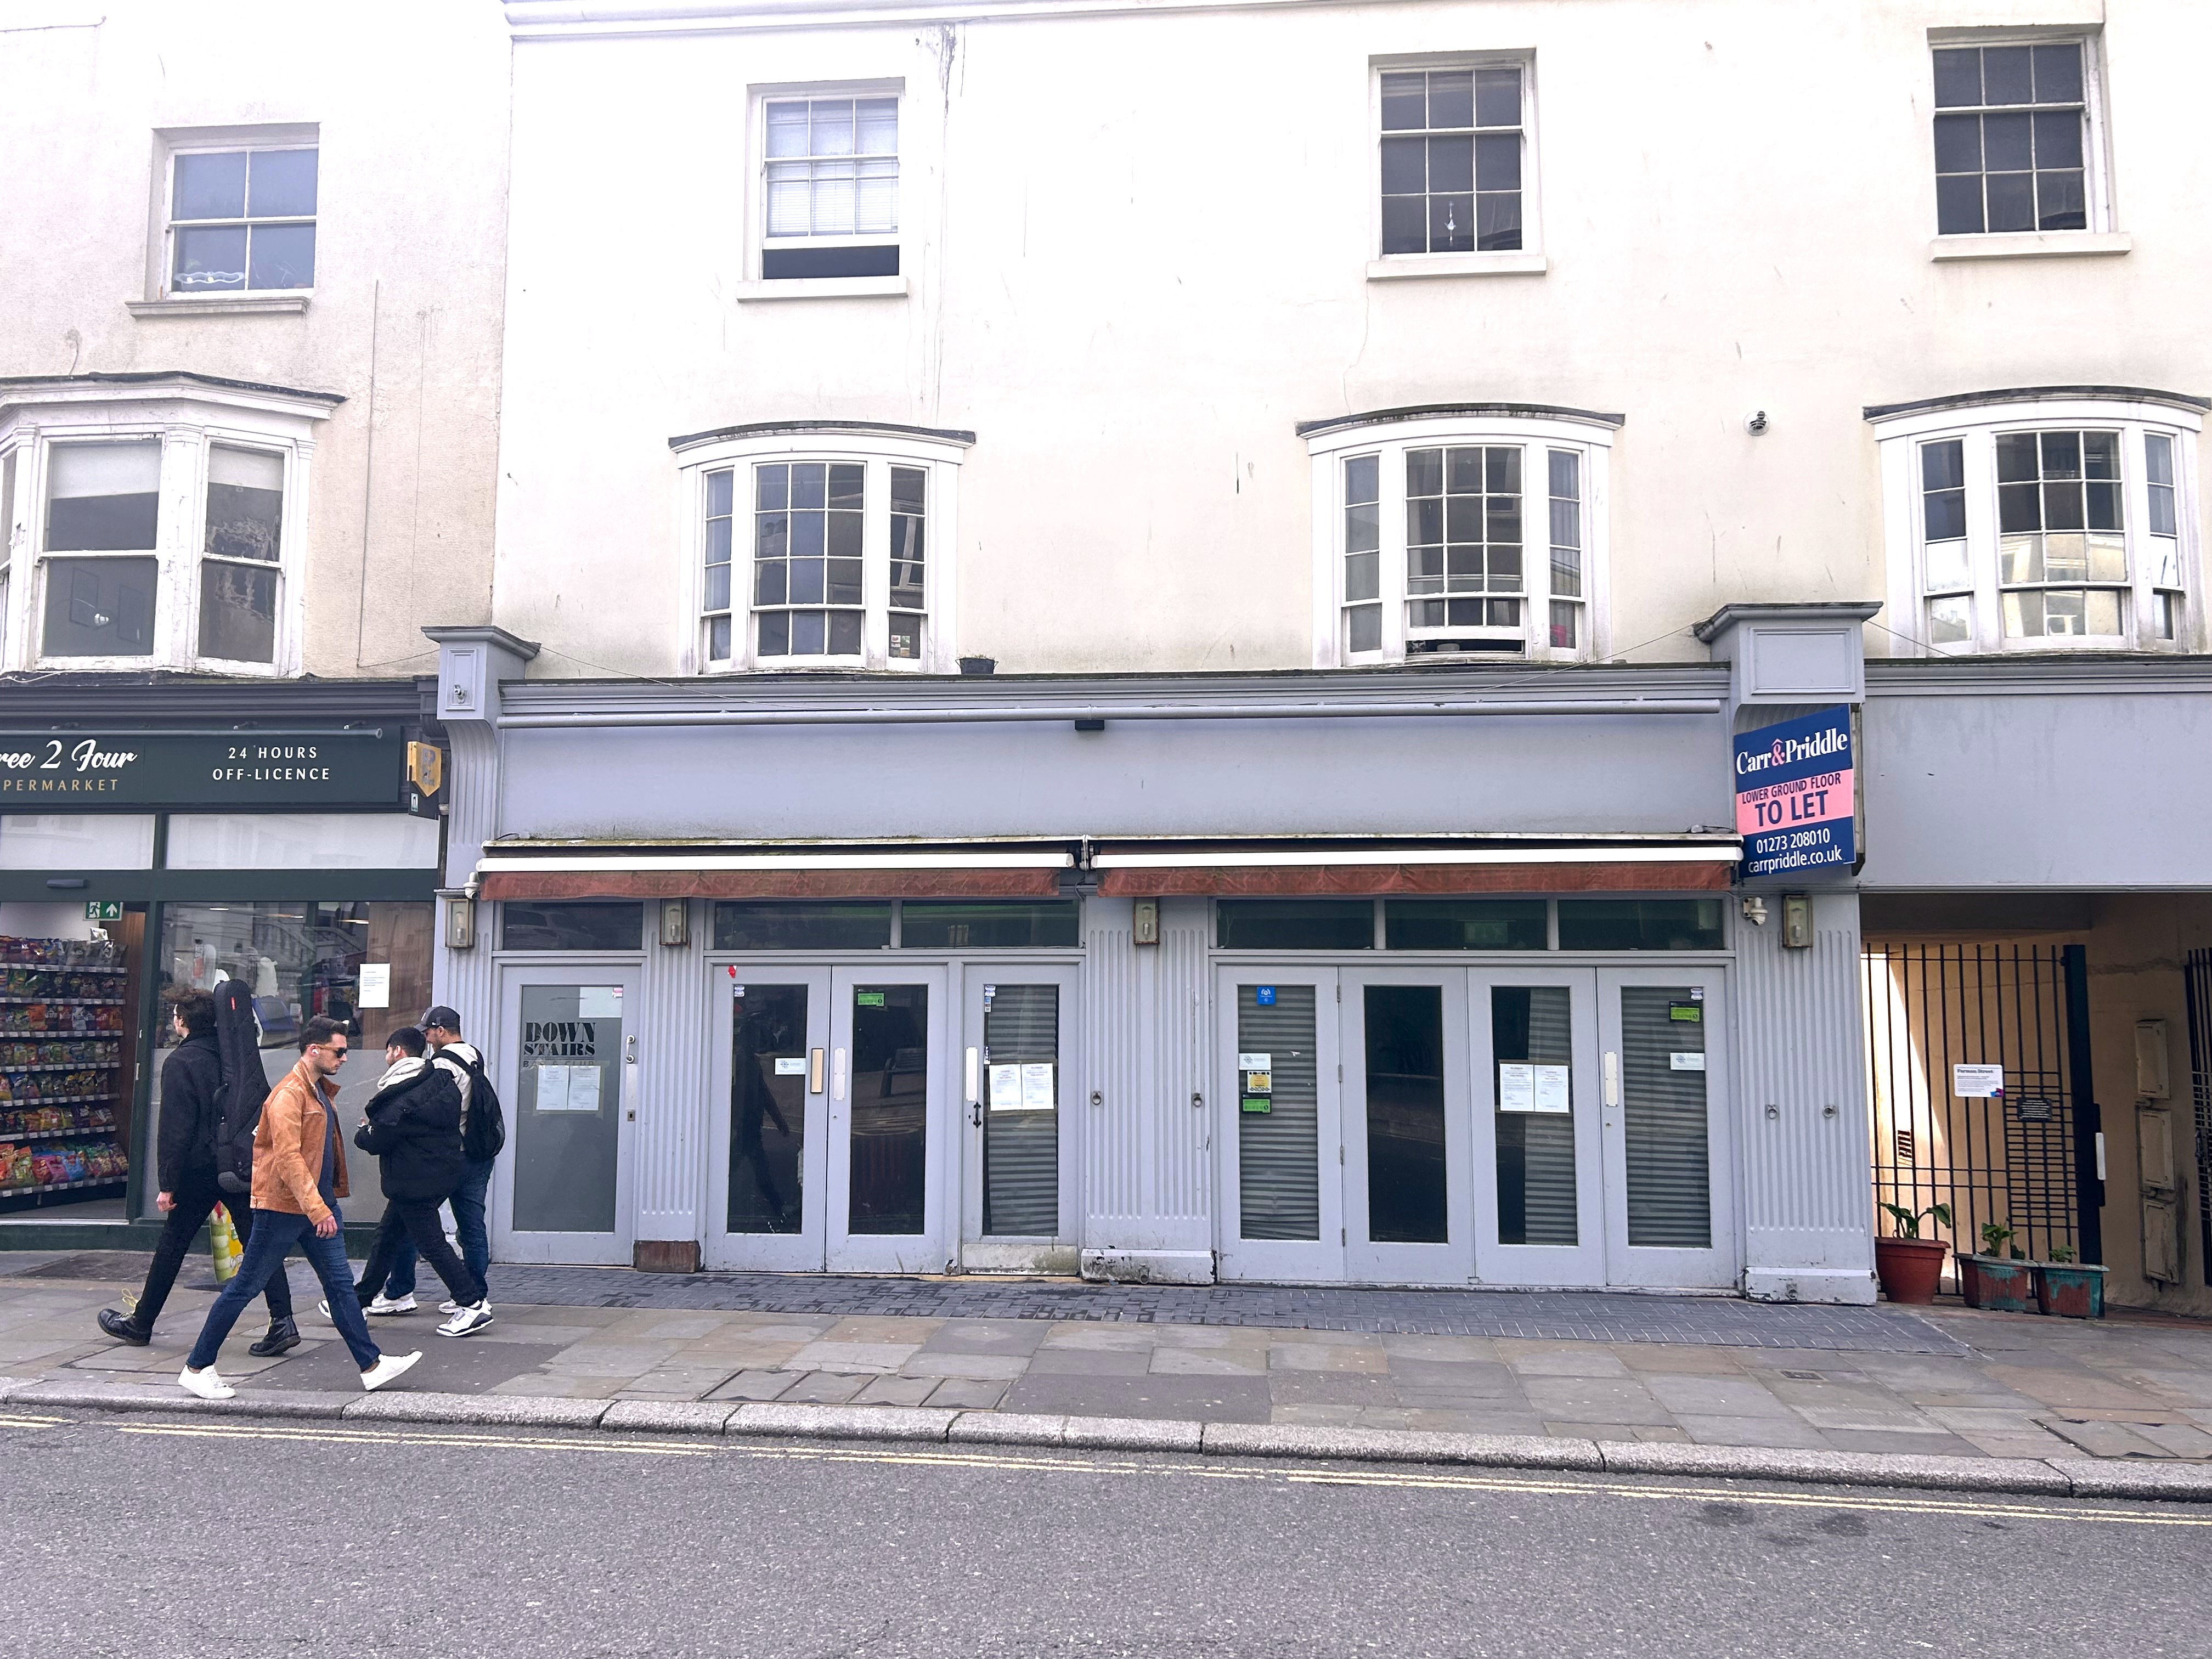 Pub for rent in Hove. From PS&B - Carr & Priddle - Brighton